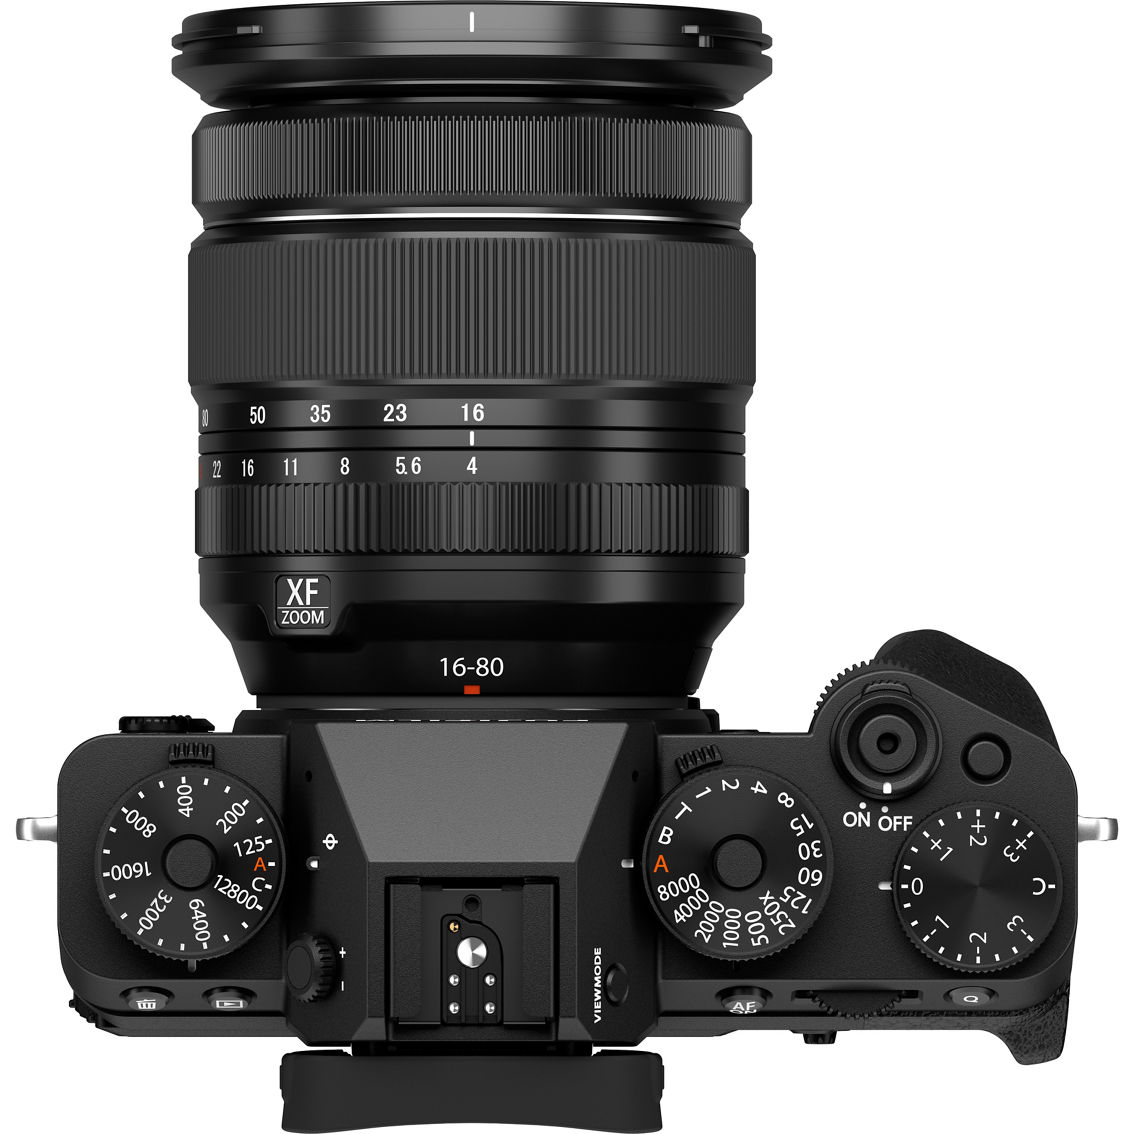 FujiFilm X-T5 Mirrorless Camera Body with XF16-80mmF4 R OIS WR Lens Kit - Image 3 of 10